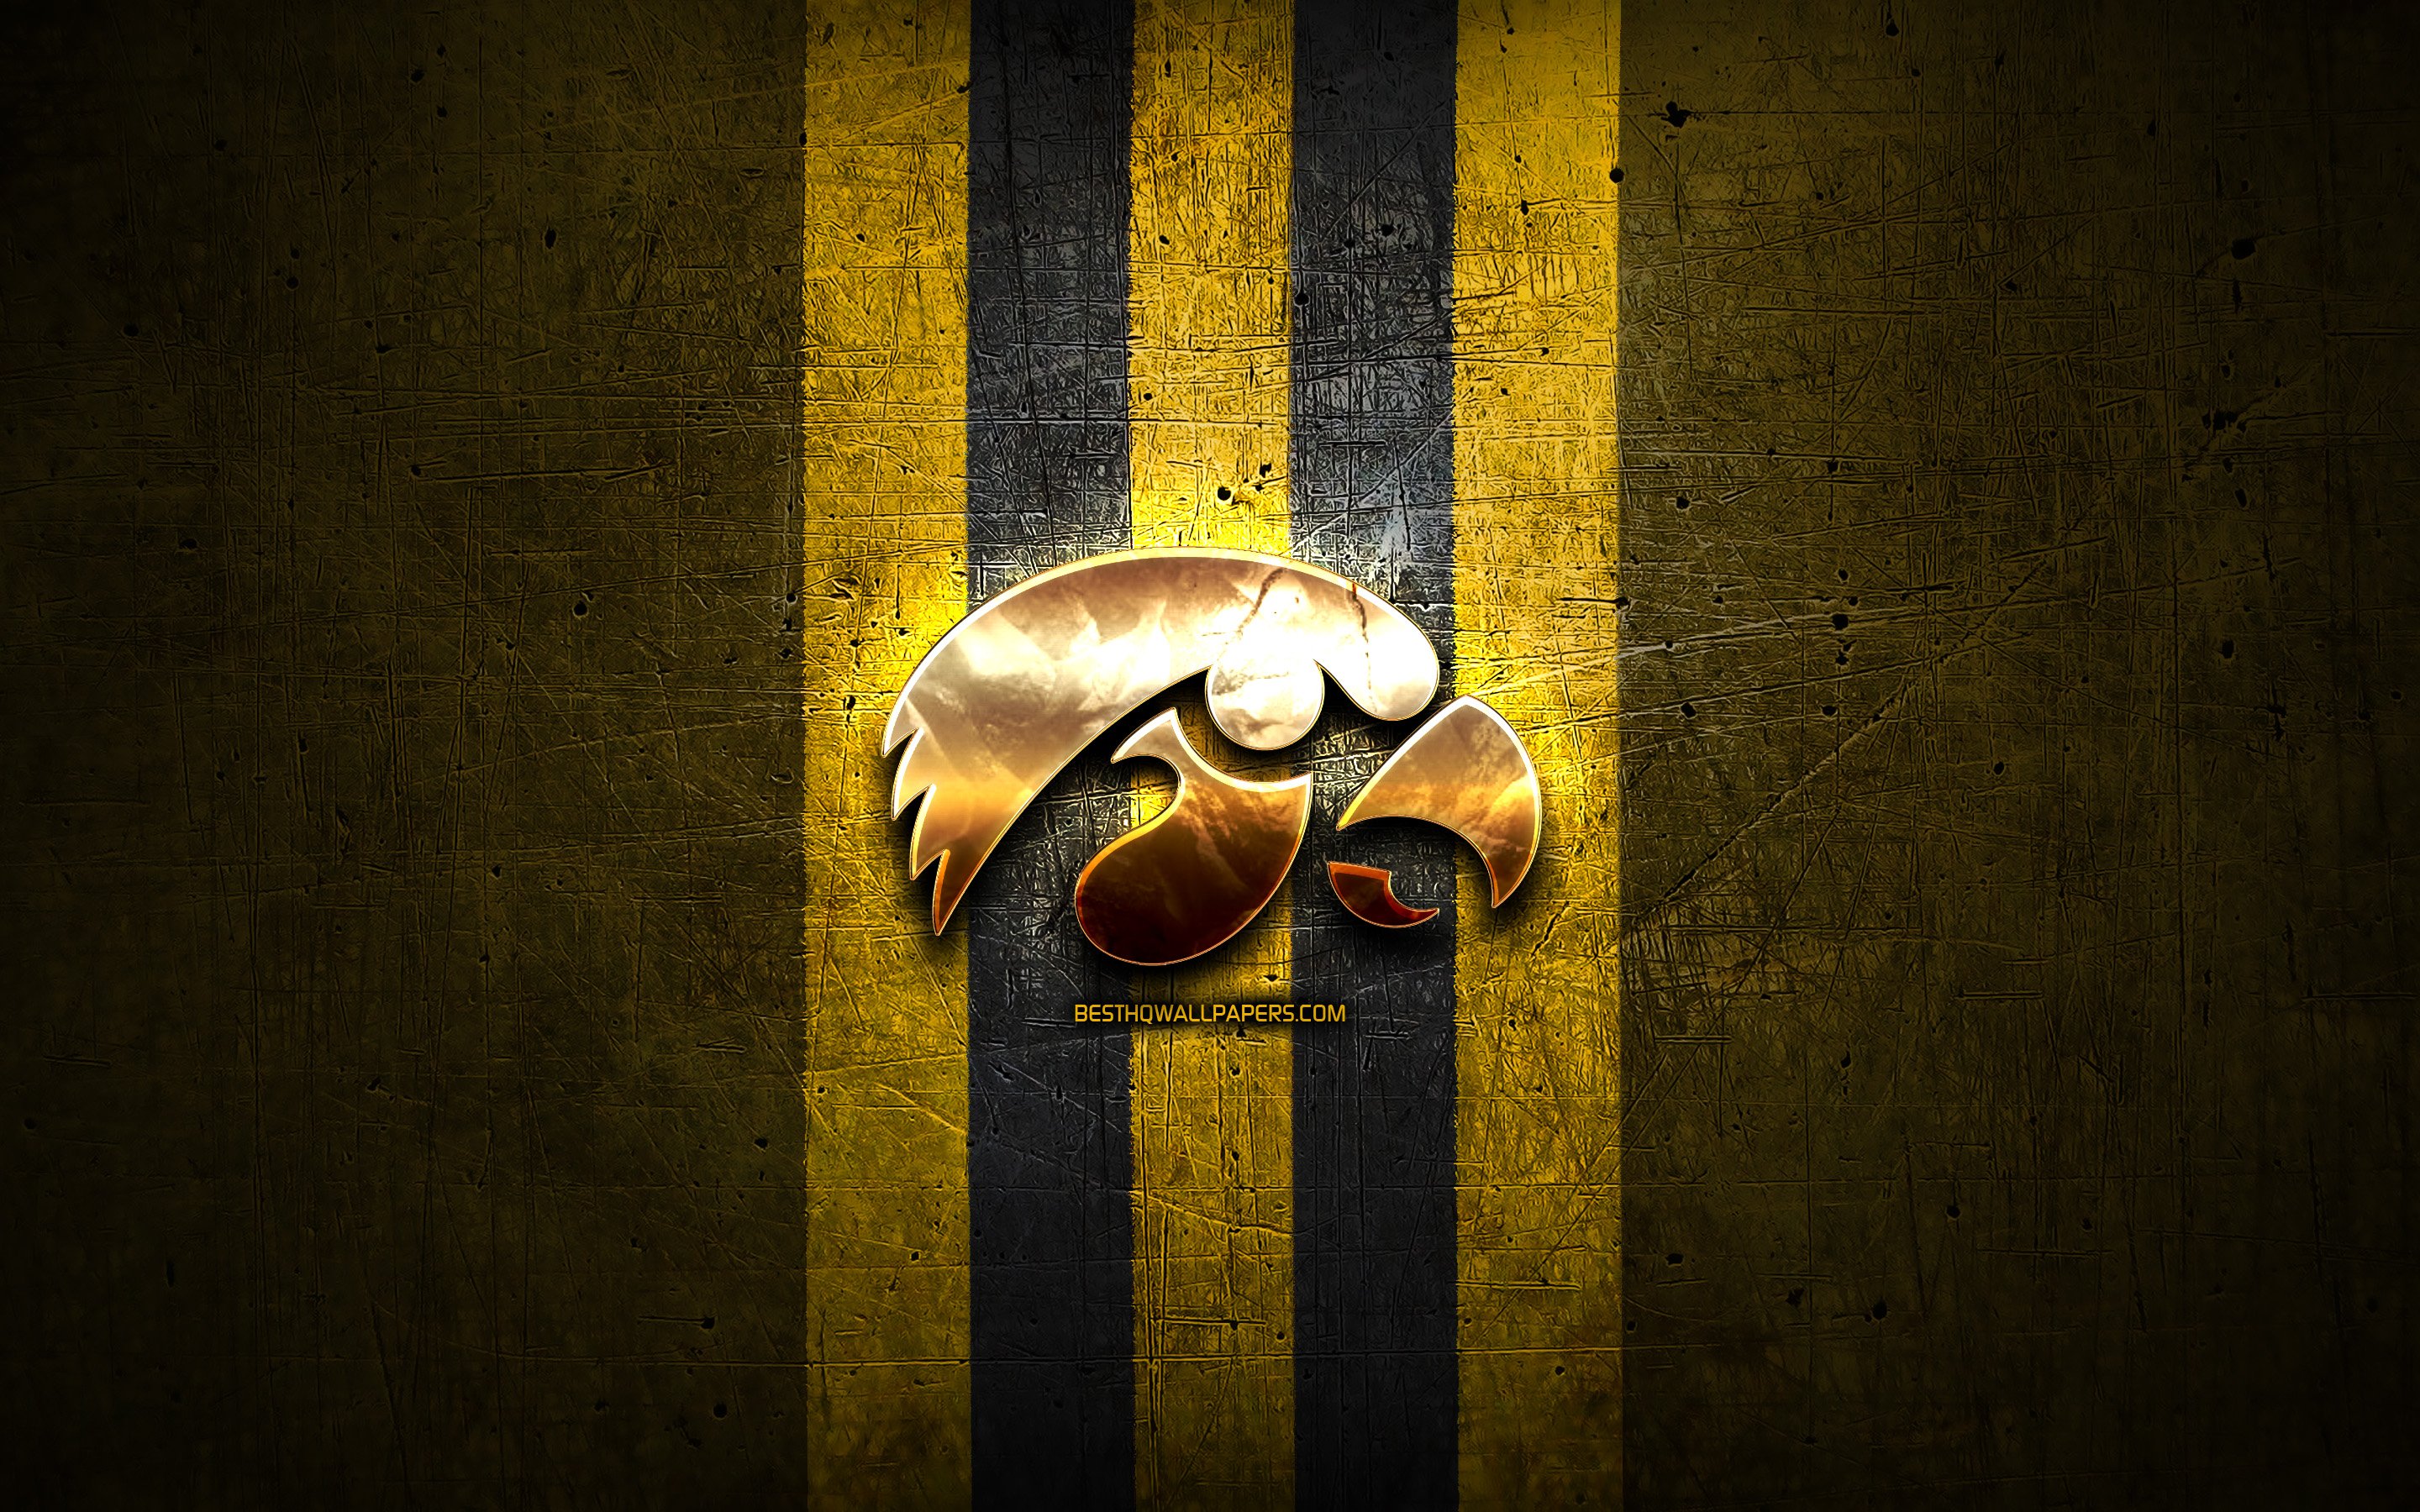 Download wallpaper Iowa Hawkeyes, golden logo, NCAA, yellow metal background, american football club, Iowa Hawkeyes logo, american football, USA for desktop with resolution 2880x1800. High Quality HD picture wallpaper